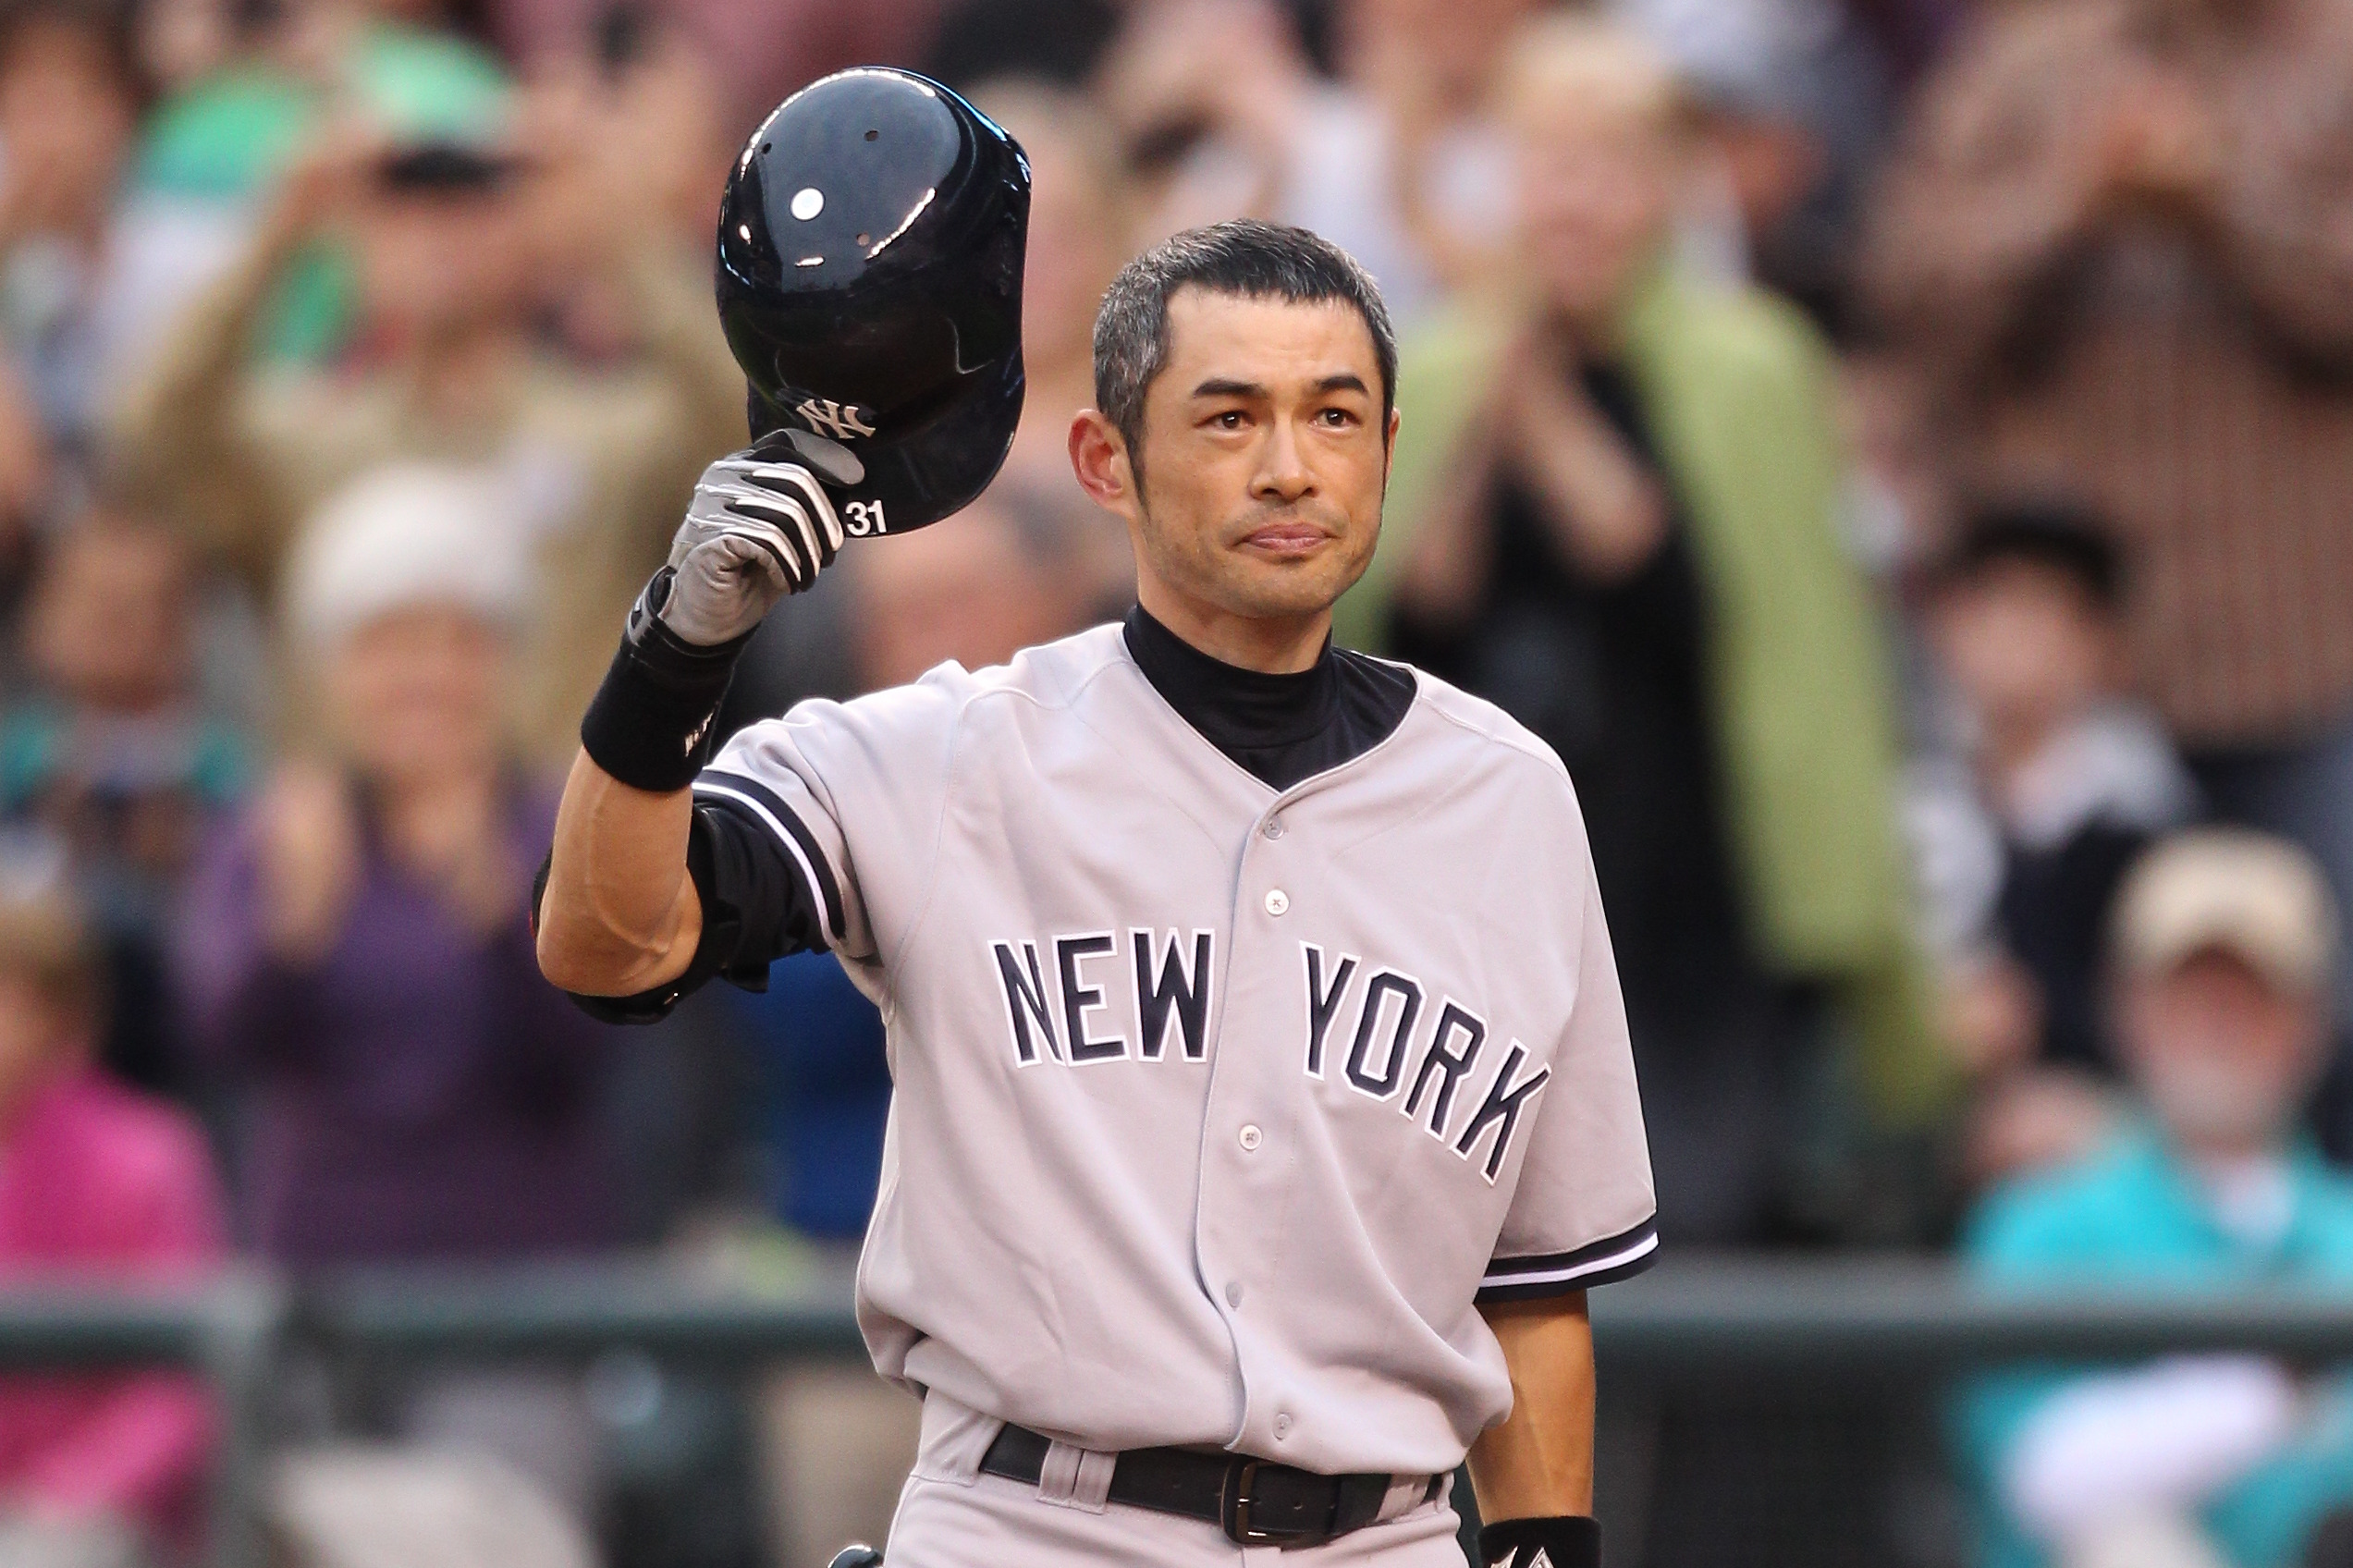 Ichiro: We recognize his name, his fame and his amazing achievements.